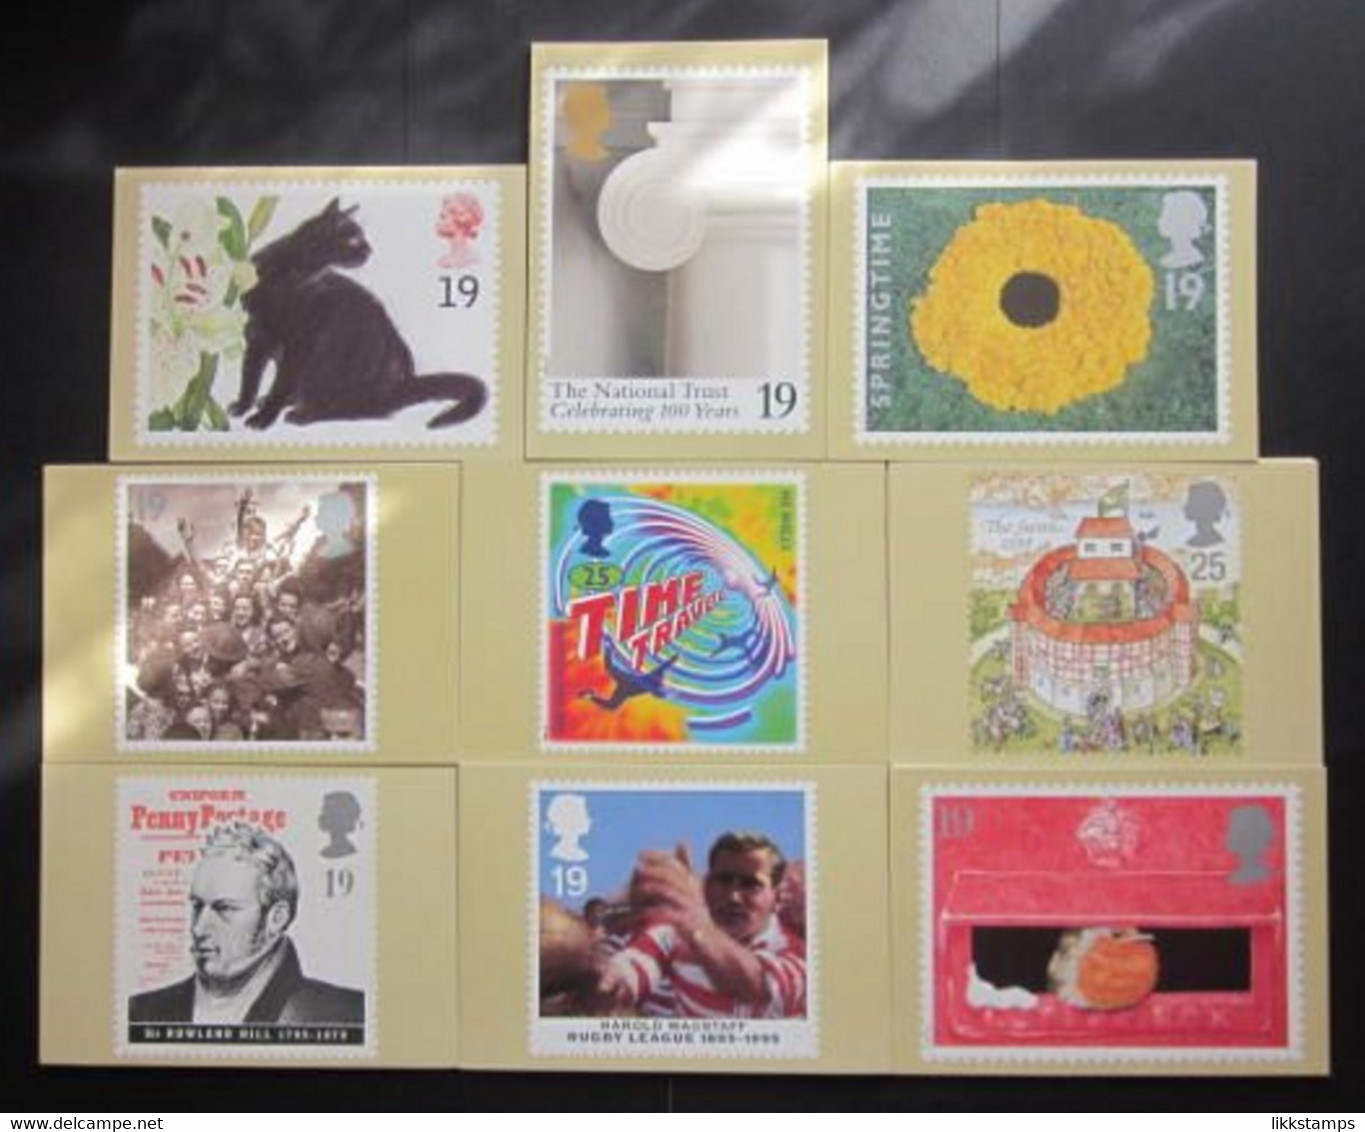 1995 THE COMPLETE YEAR SET OF COMMEMORATIVE P.H.Q. CARDS UNUSED. ISSUE Nos. 167 To 175 (B) #01195 - PHQ Karten